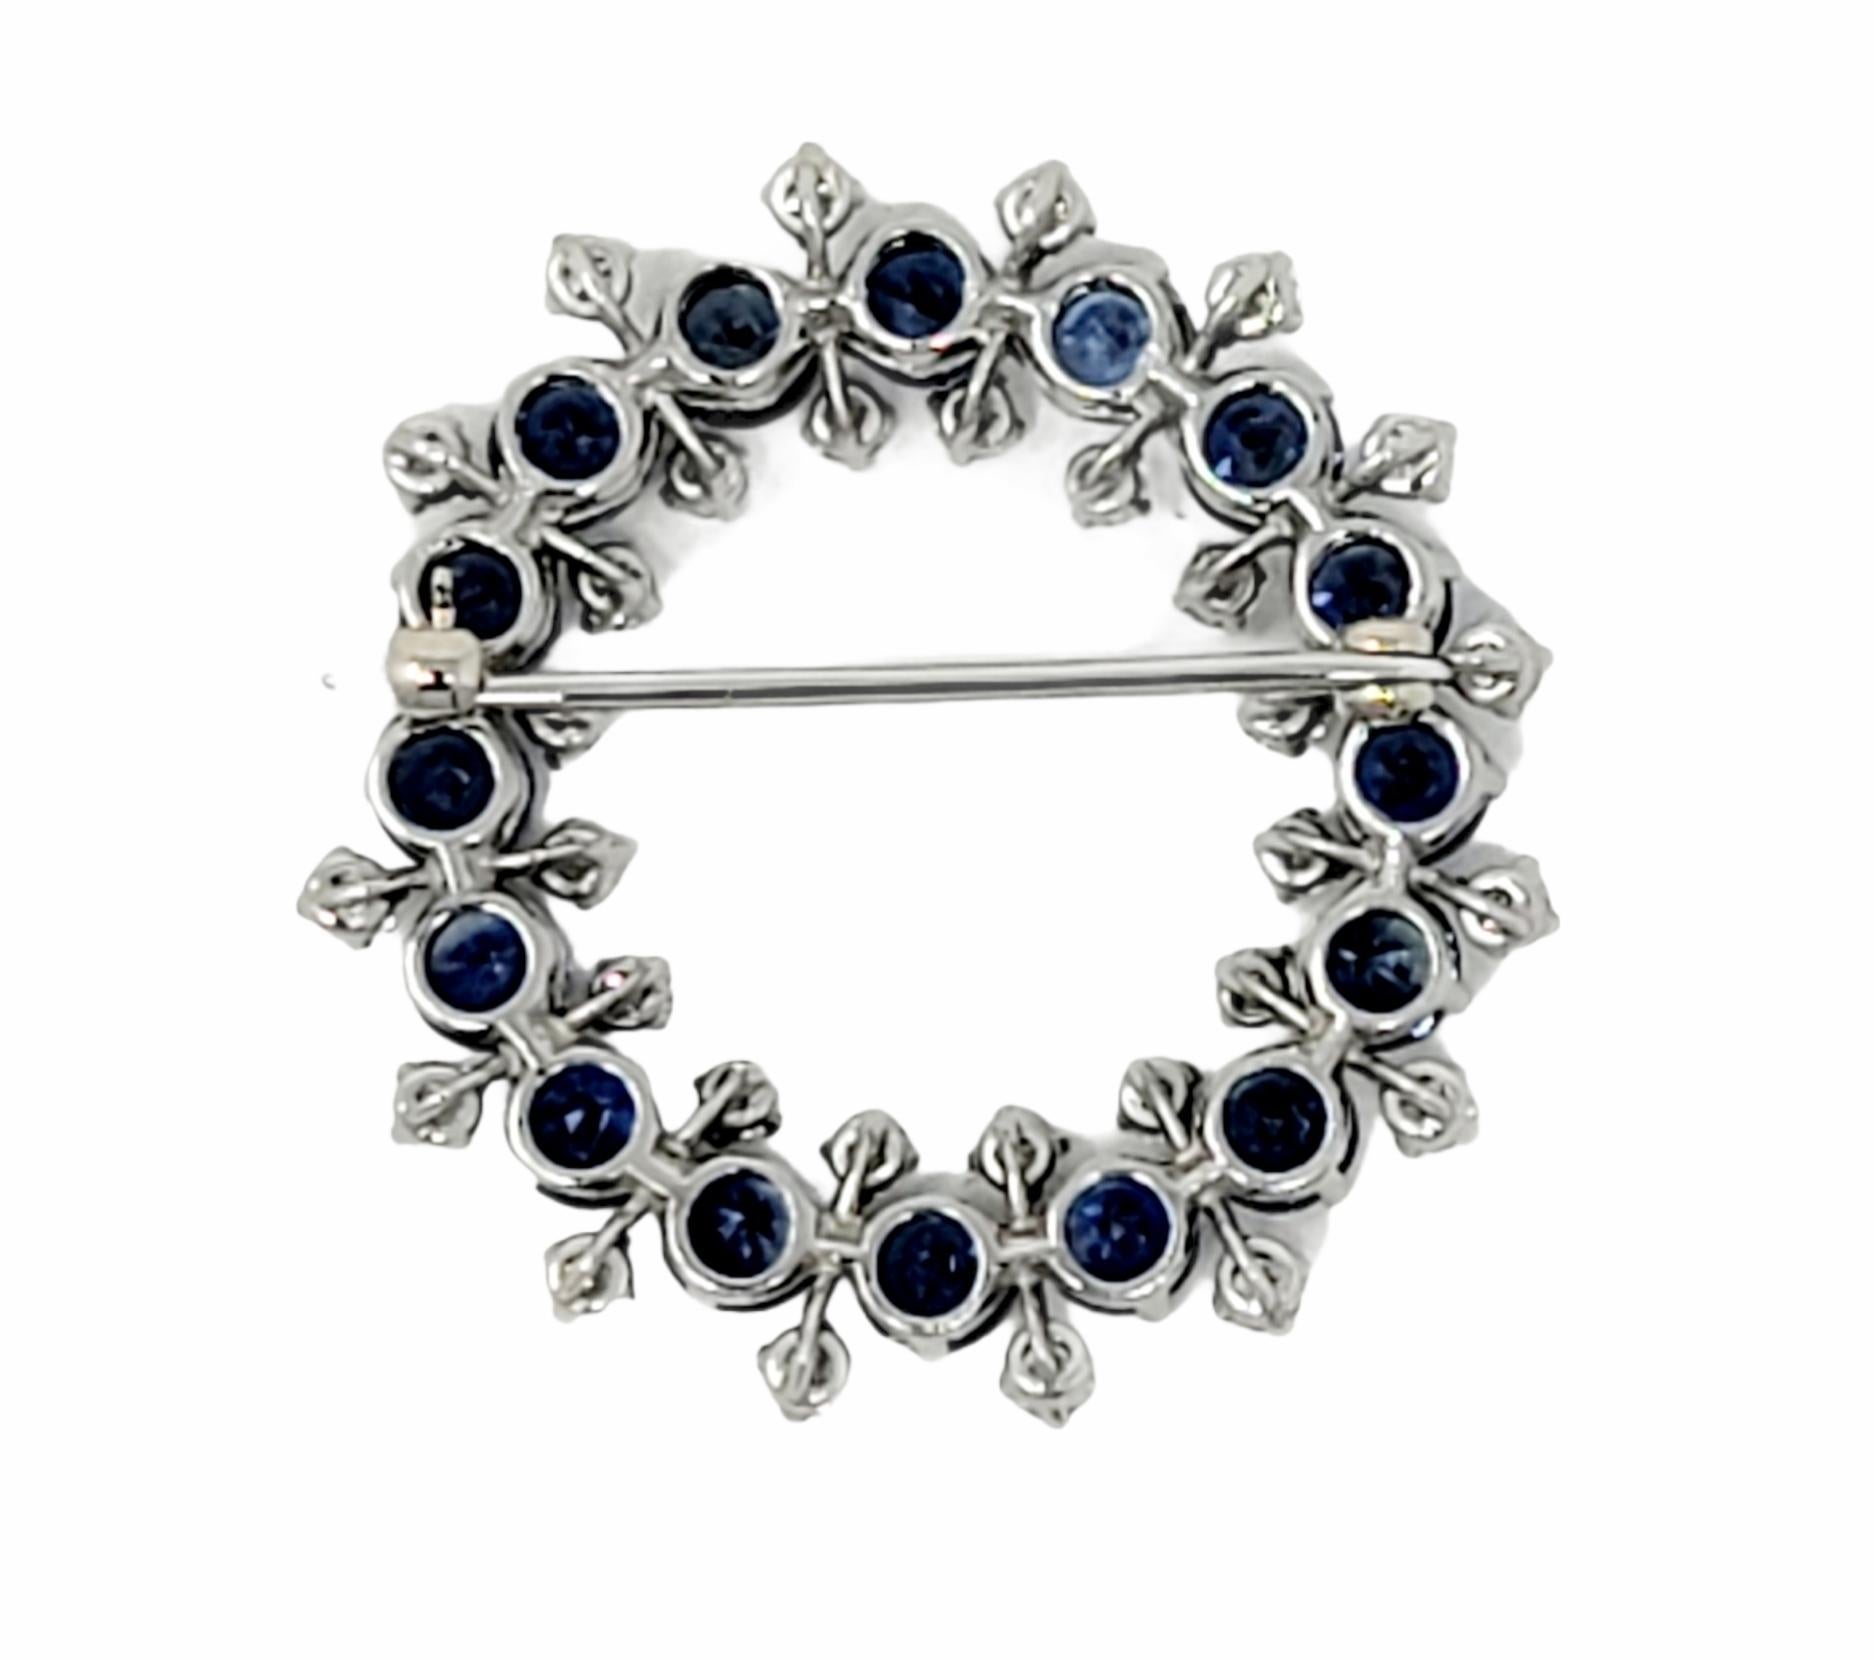 8.17 Carats Total Sapphire and Diamond Open Circle Wreath Brooch in Platinum 2